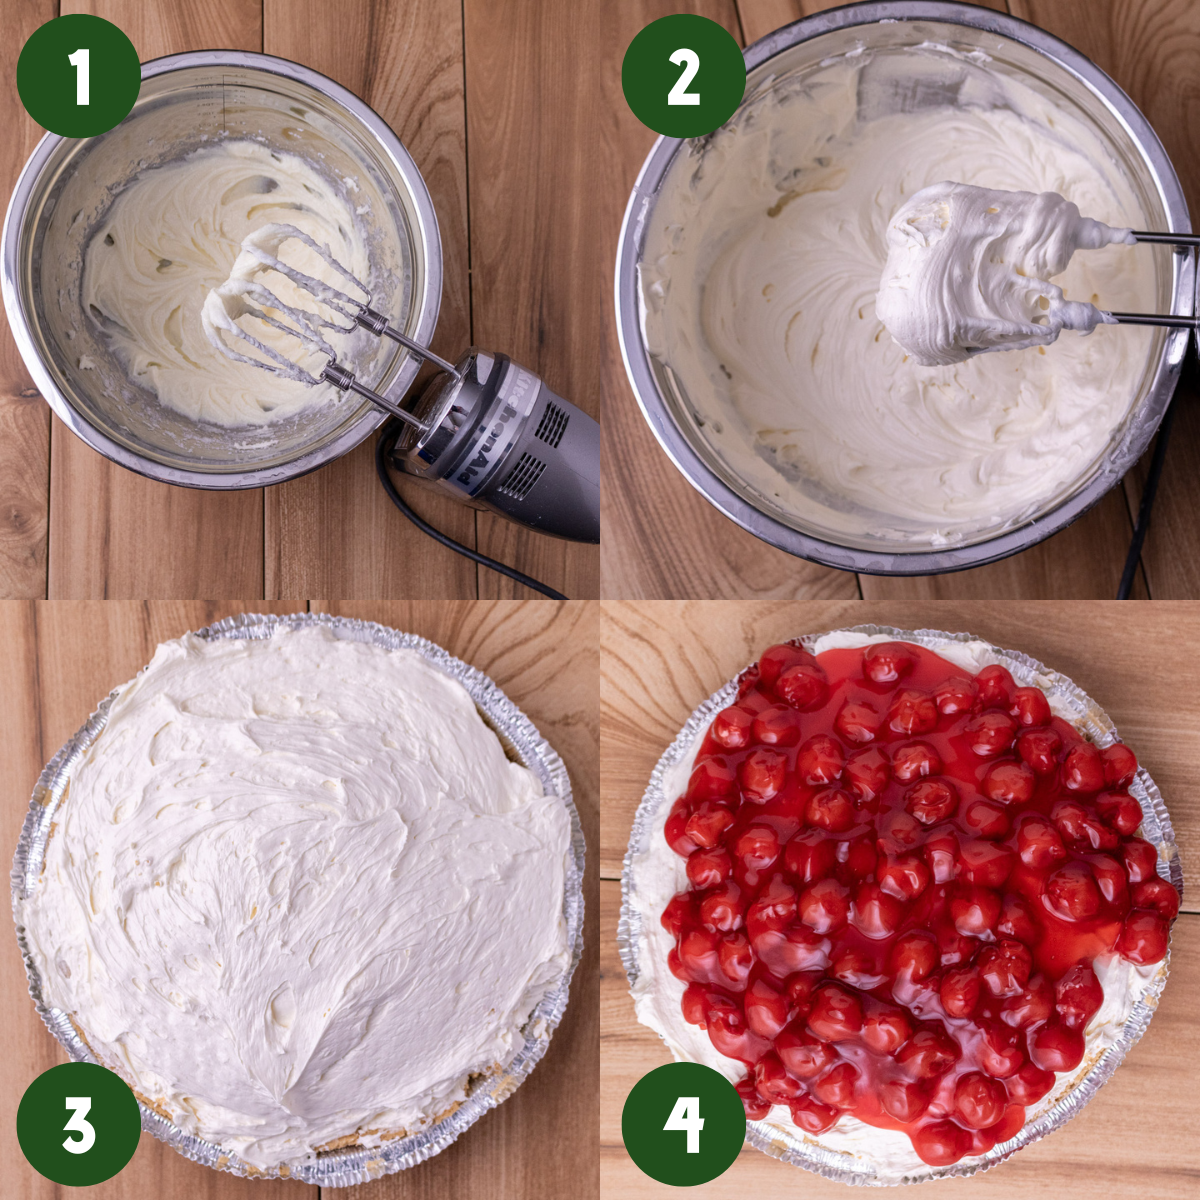 2 by 2 photo collage on how to make cherry pie. Photo 1) Cream cheese and sugar whipped together in a metal mixing bowl next to a hand mixer. Photo 2) The filling is all whipped together in a metal mixing bow. Photo 3) The cream mixture is spread into the pie crust. Photo 4) Cherry pie filling to spread over the cream in the pie crust.